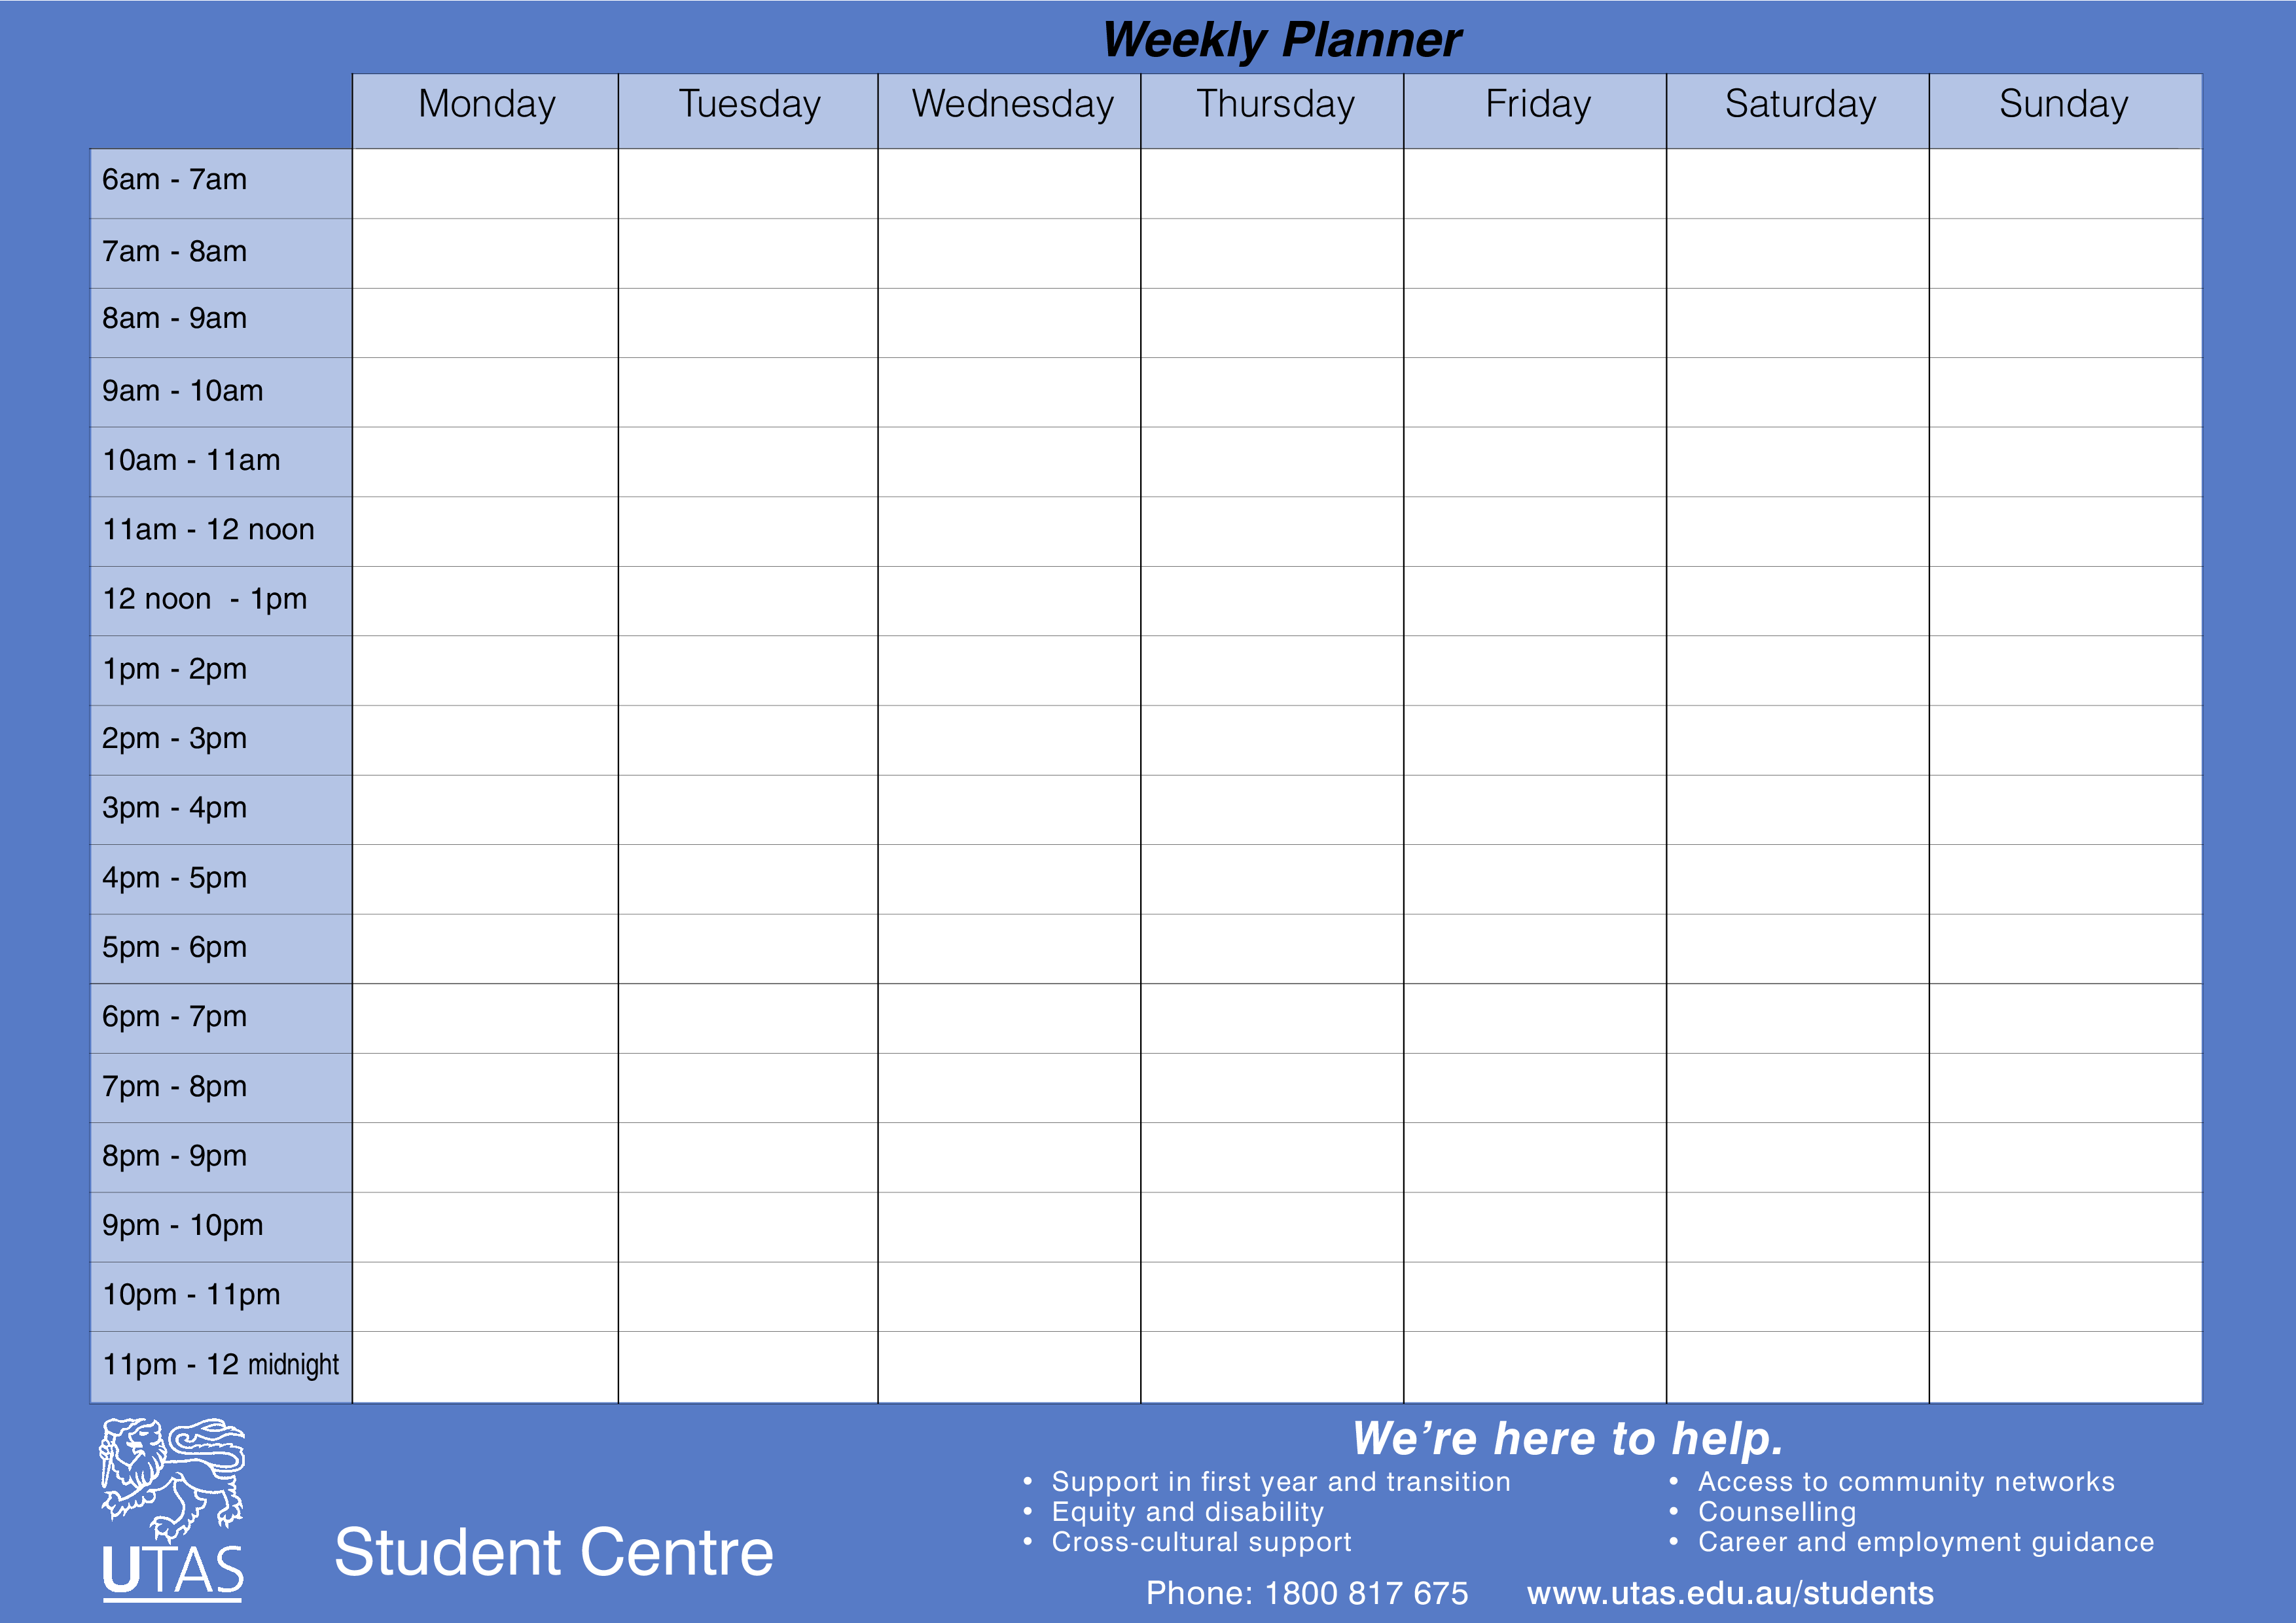 Weekly Planner Templates at allbusinesstemplates com